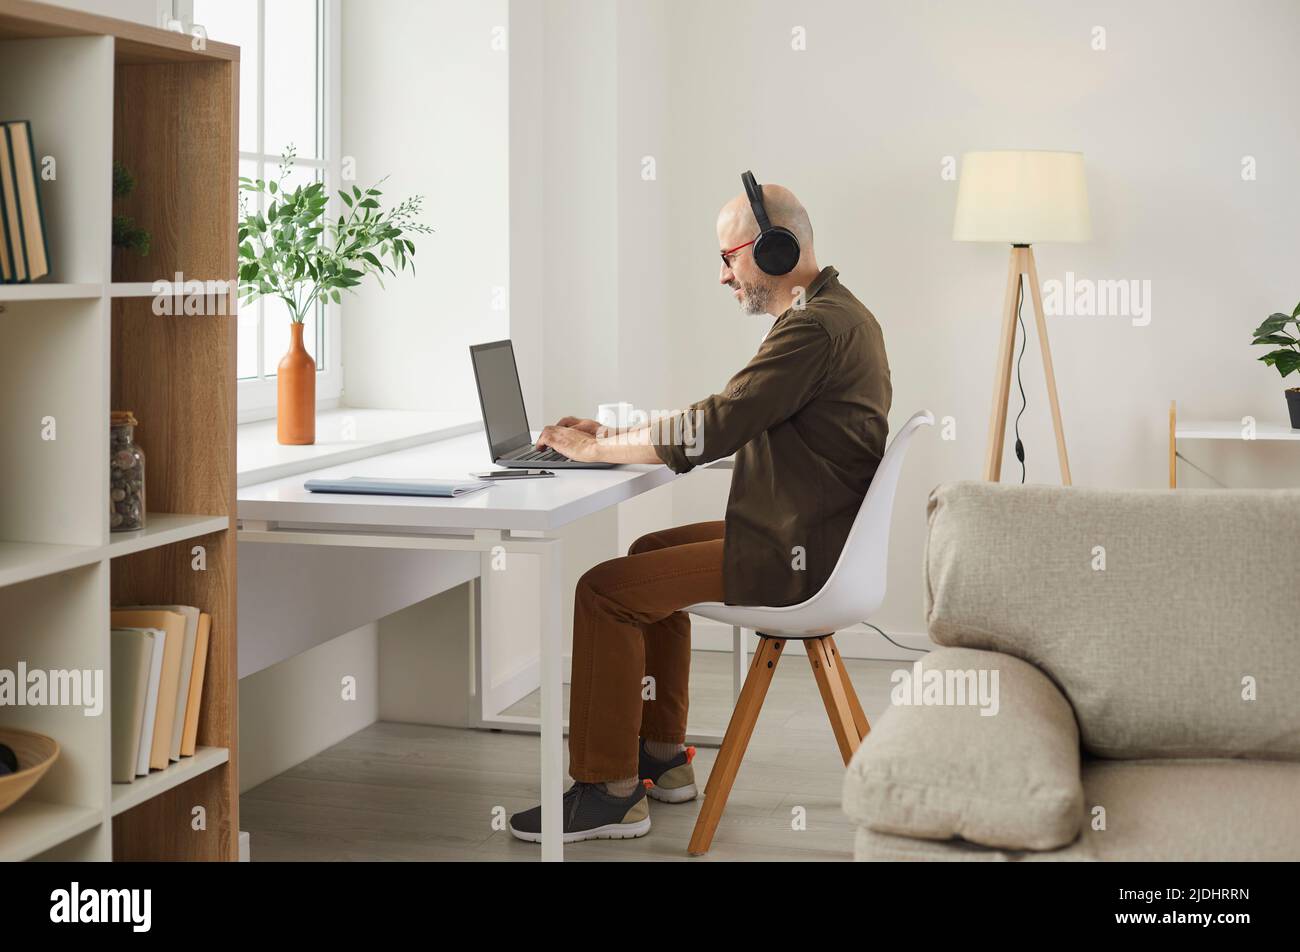 Smiling adult man listening to music on headphones while working on laptop at home. Stock Photo